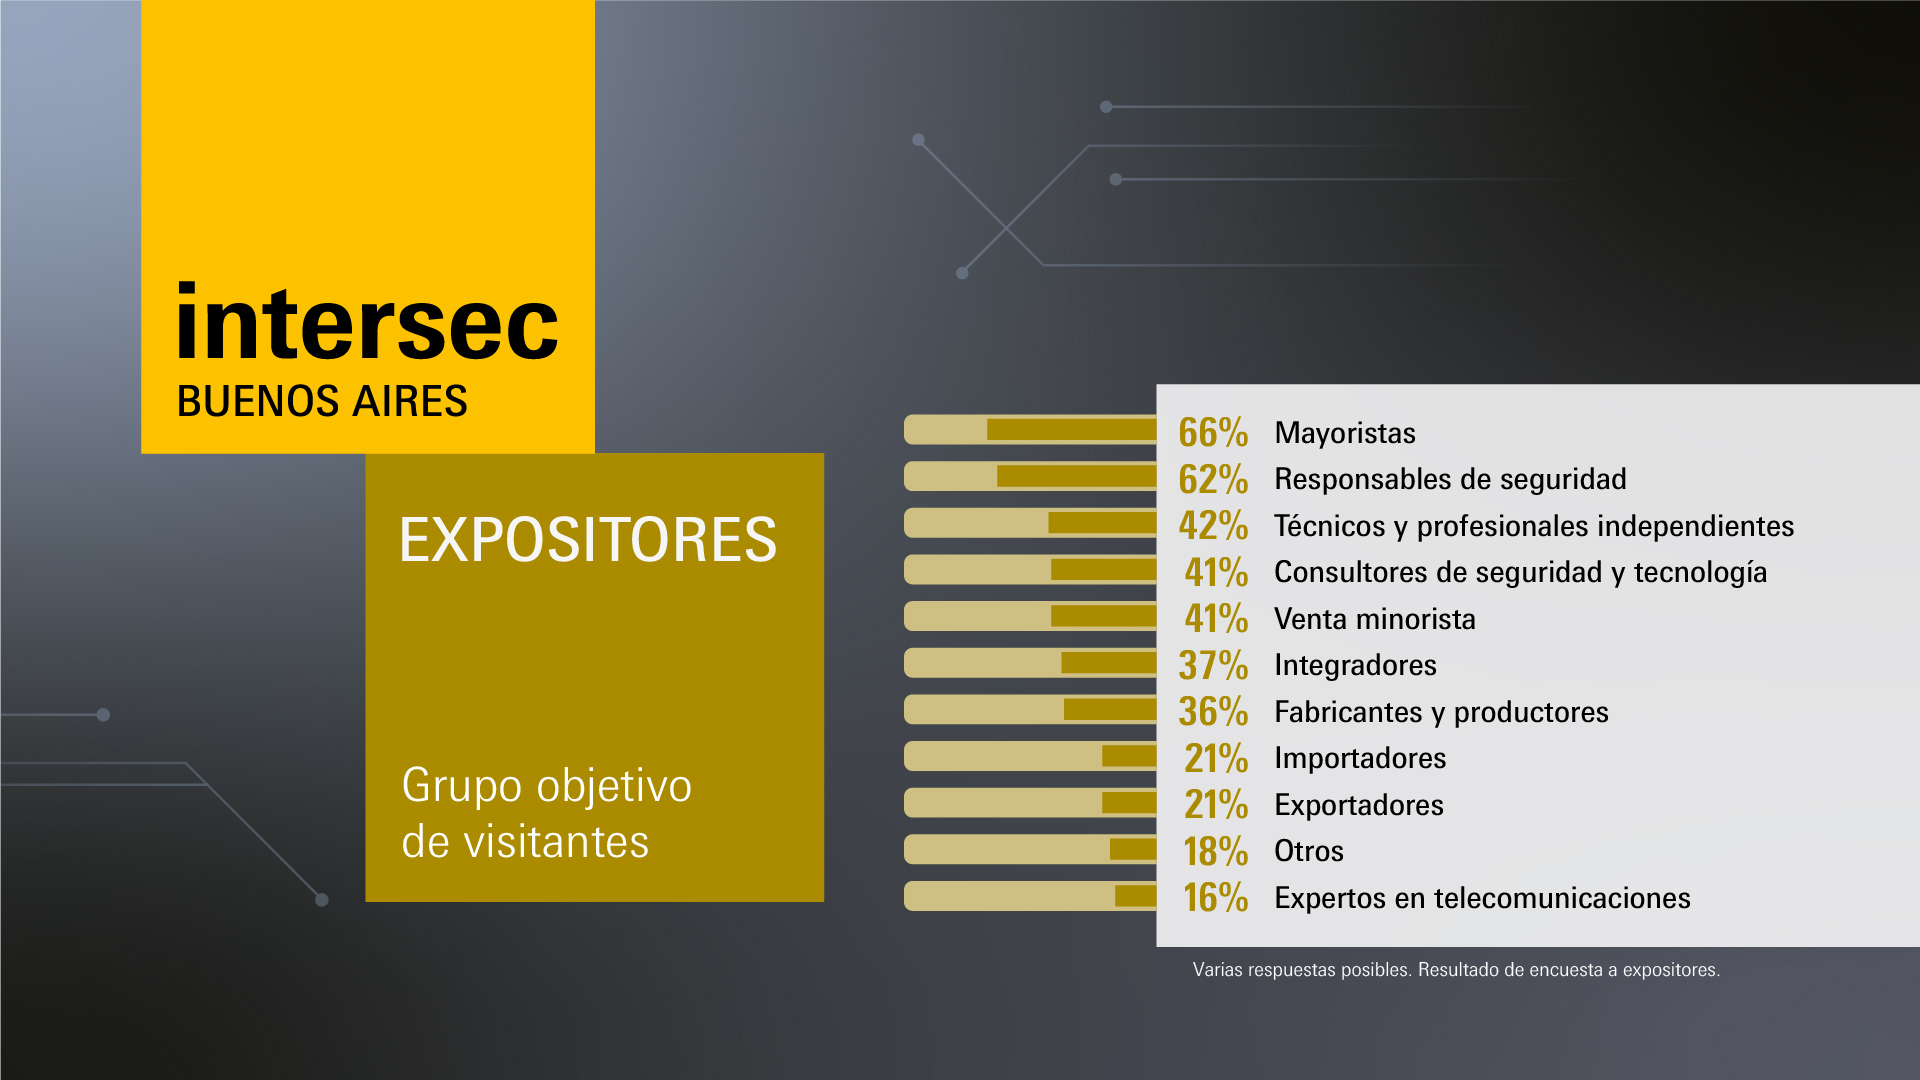 Intersec Buenos Aires: Expositores - Target group